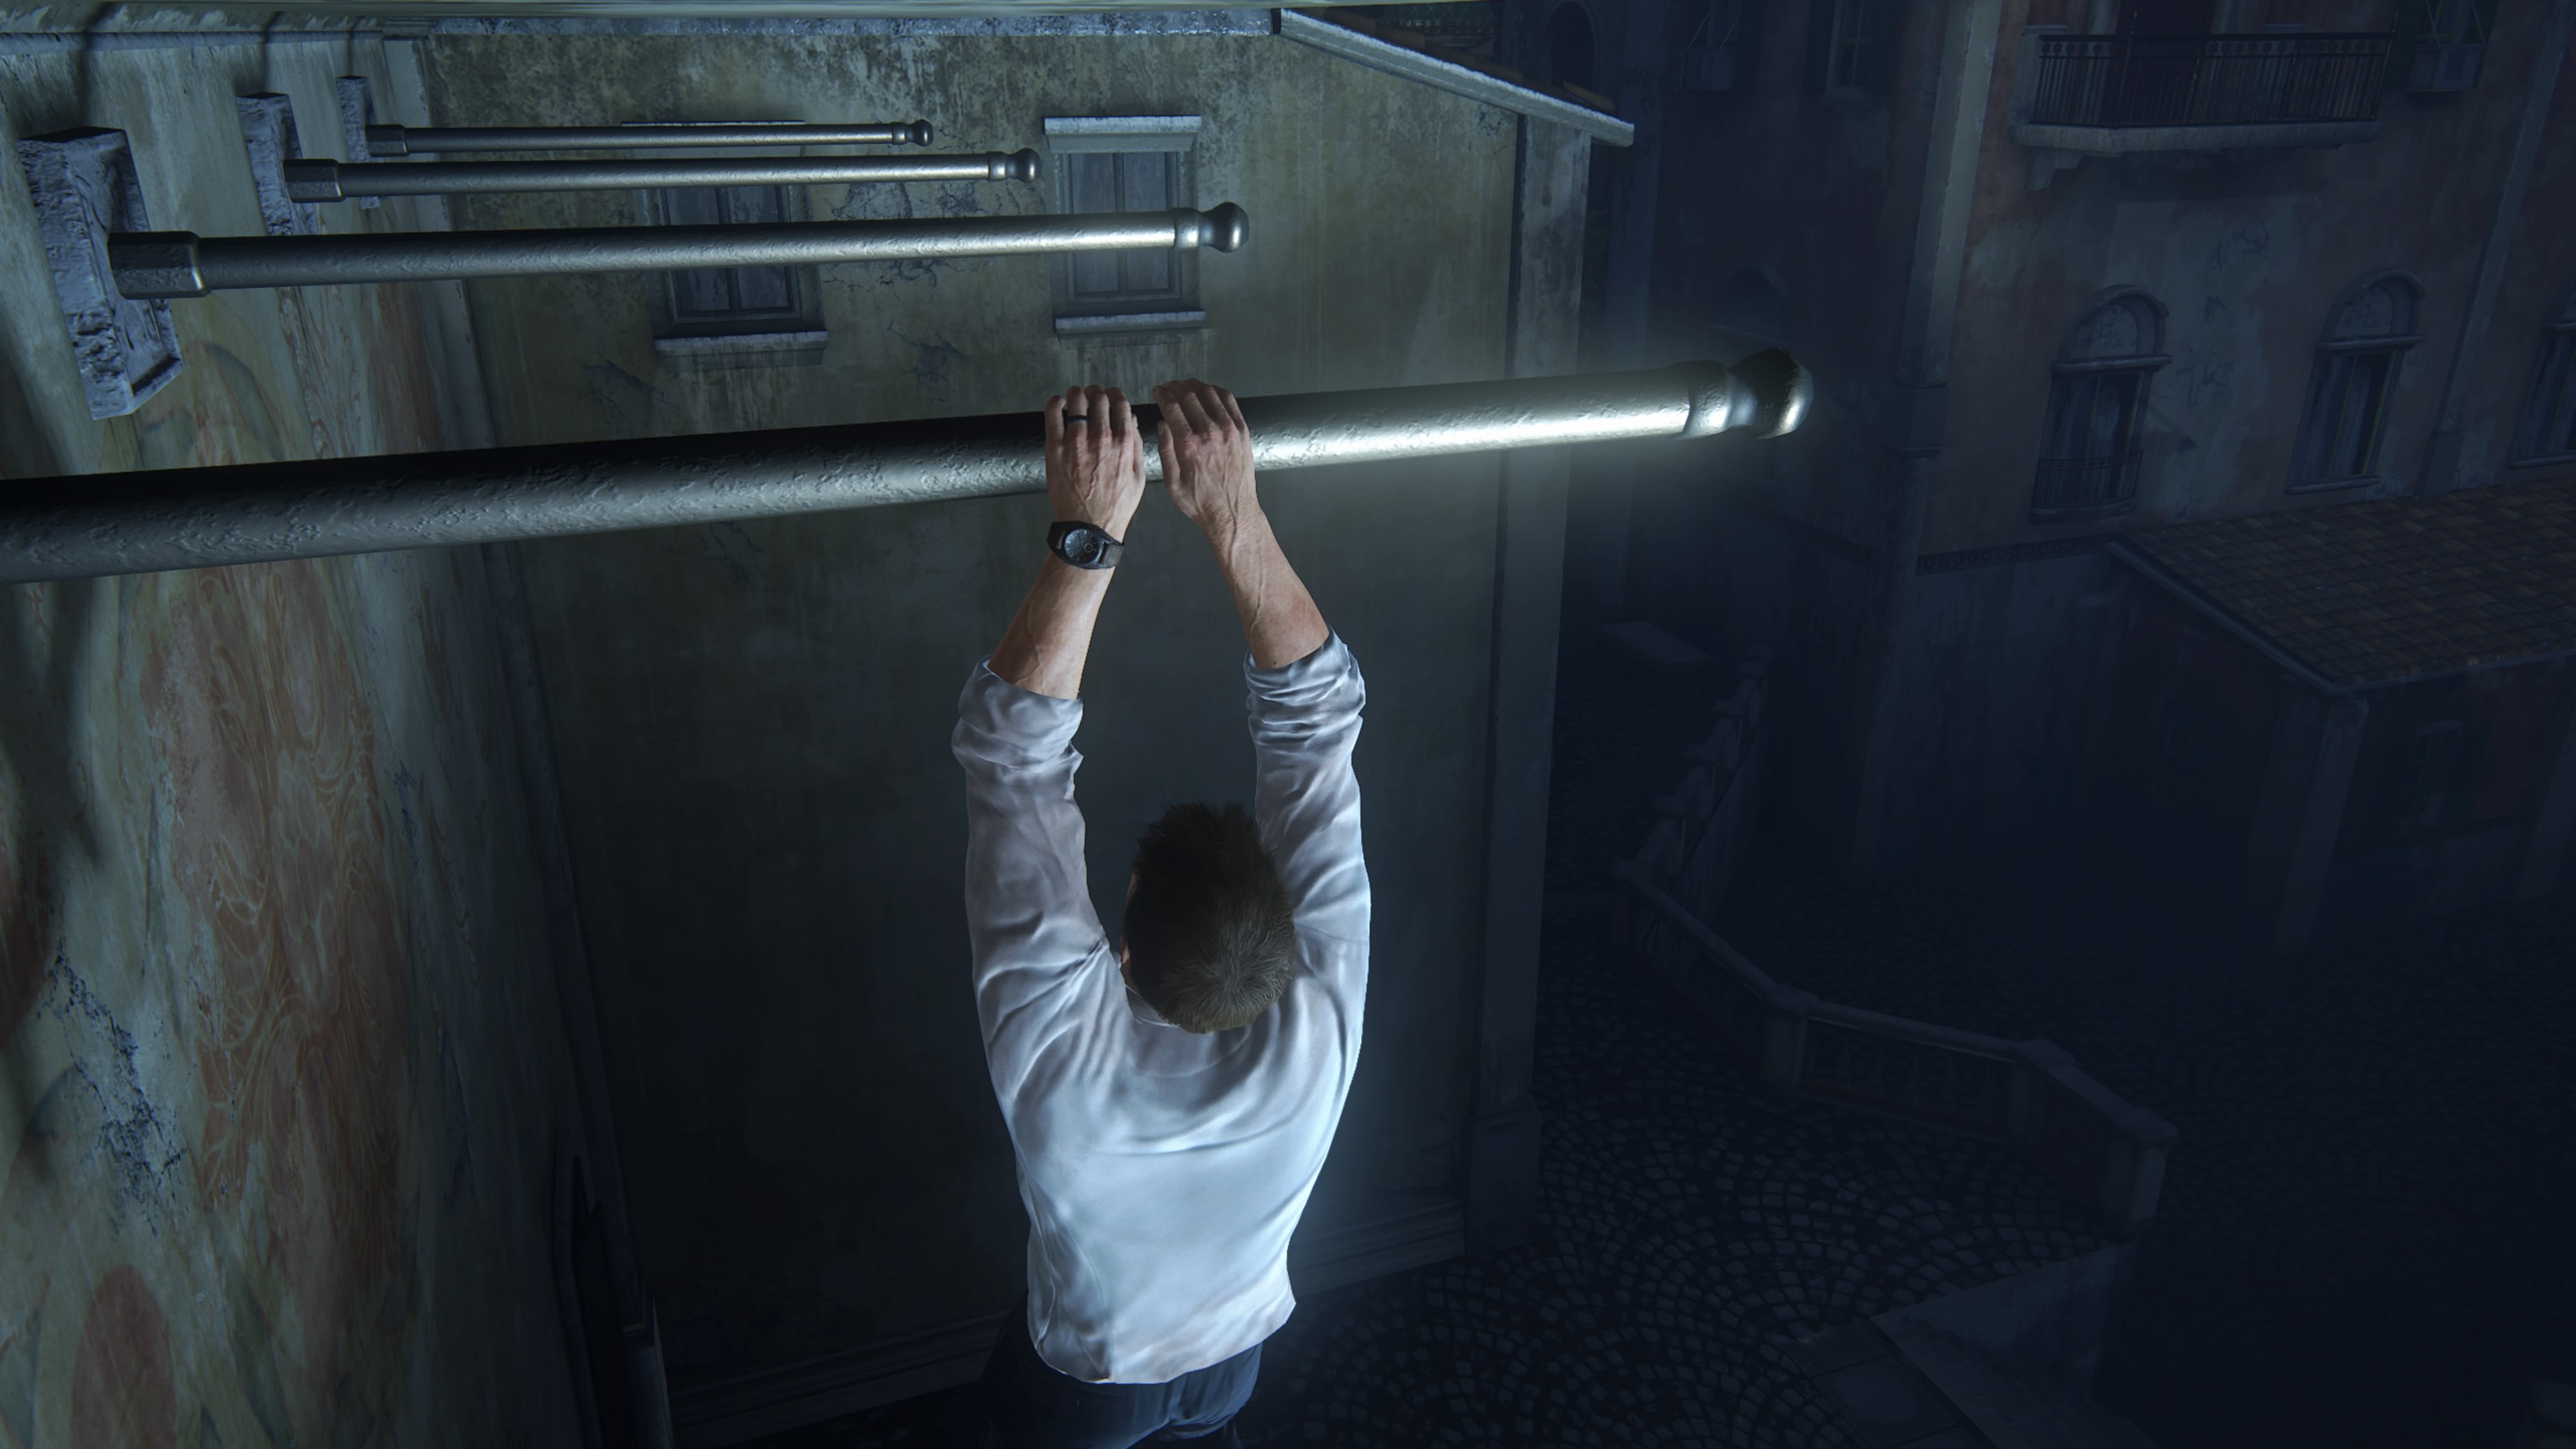 we can see the veins on nathan's hands straining as he hangs onto a pole on the side of a building, except it's strange because there is a whole row of these poles poking out of the side of the building, and they can't be flag poles because they are tucked away in a dark place, so it's literally just for the player to get across - and i hate that so much, it's so obvious